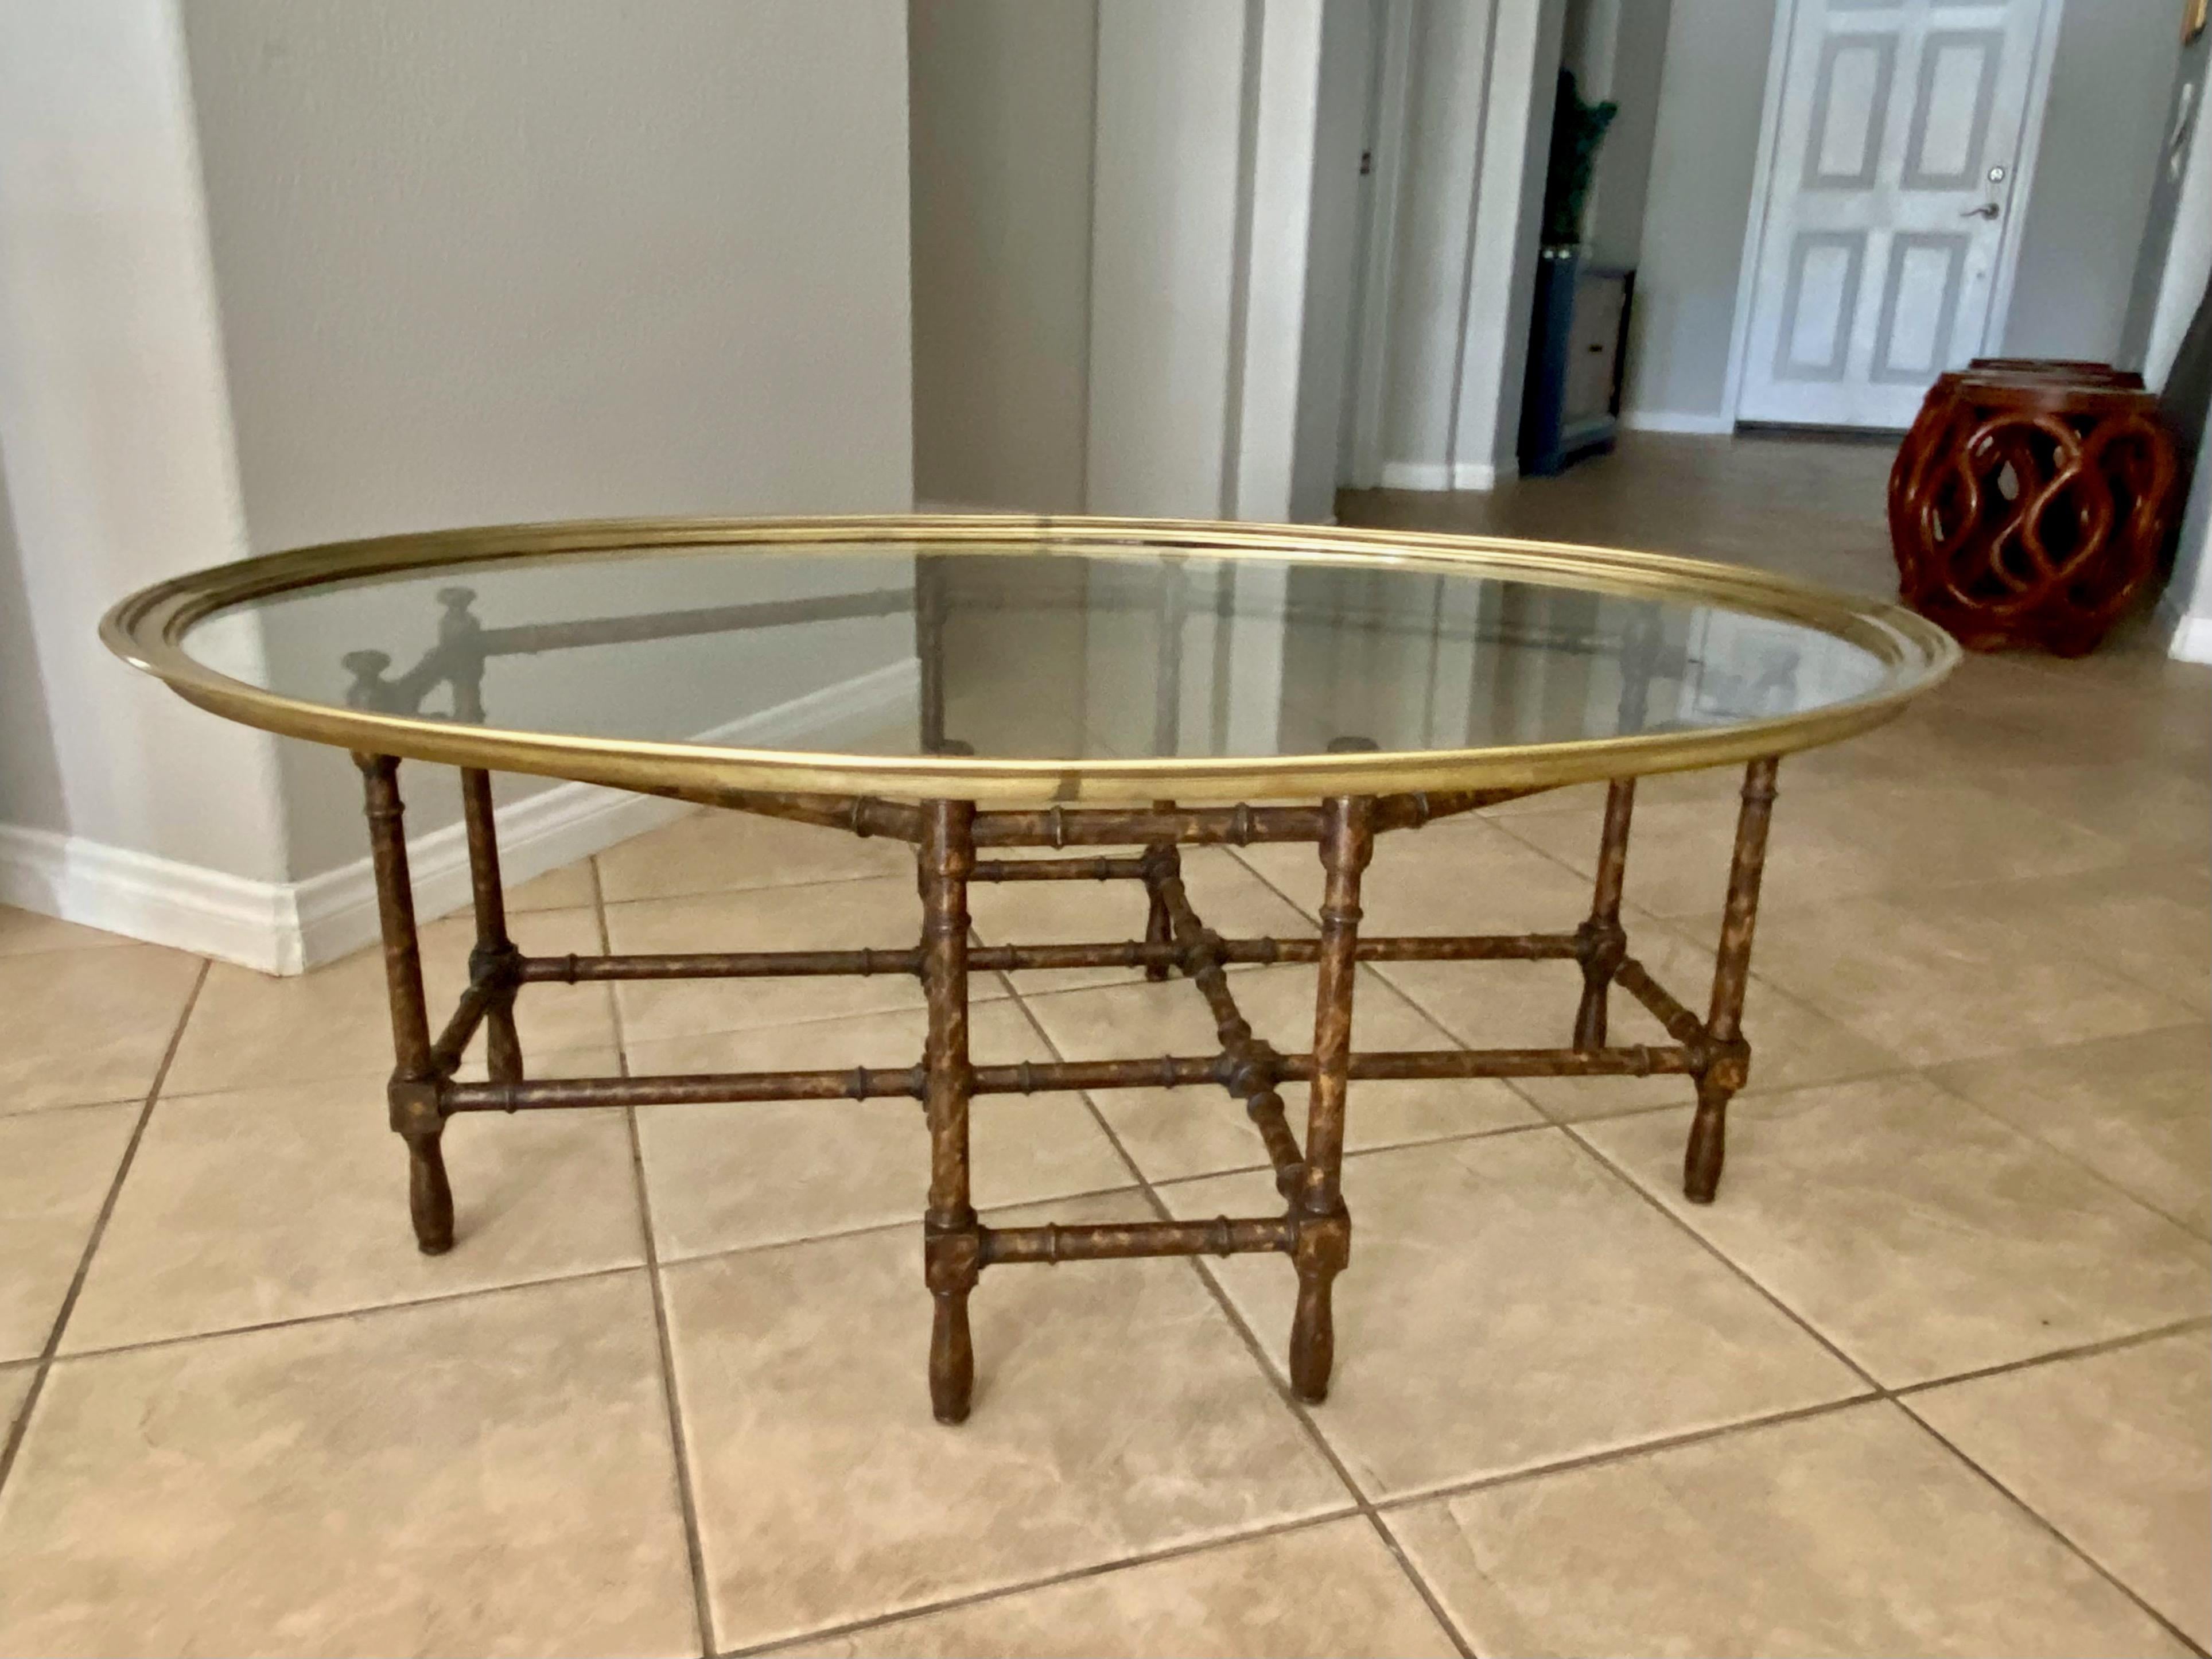 Oval brass and glass inset top coffee table resting on faux bamboo wood with faux tortoise shell lacquered finish base. The removable oval brass edged glass top is solid and heavy. Octagonal base features brass caps on the eight legs.